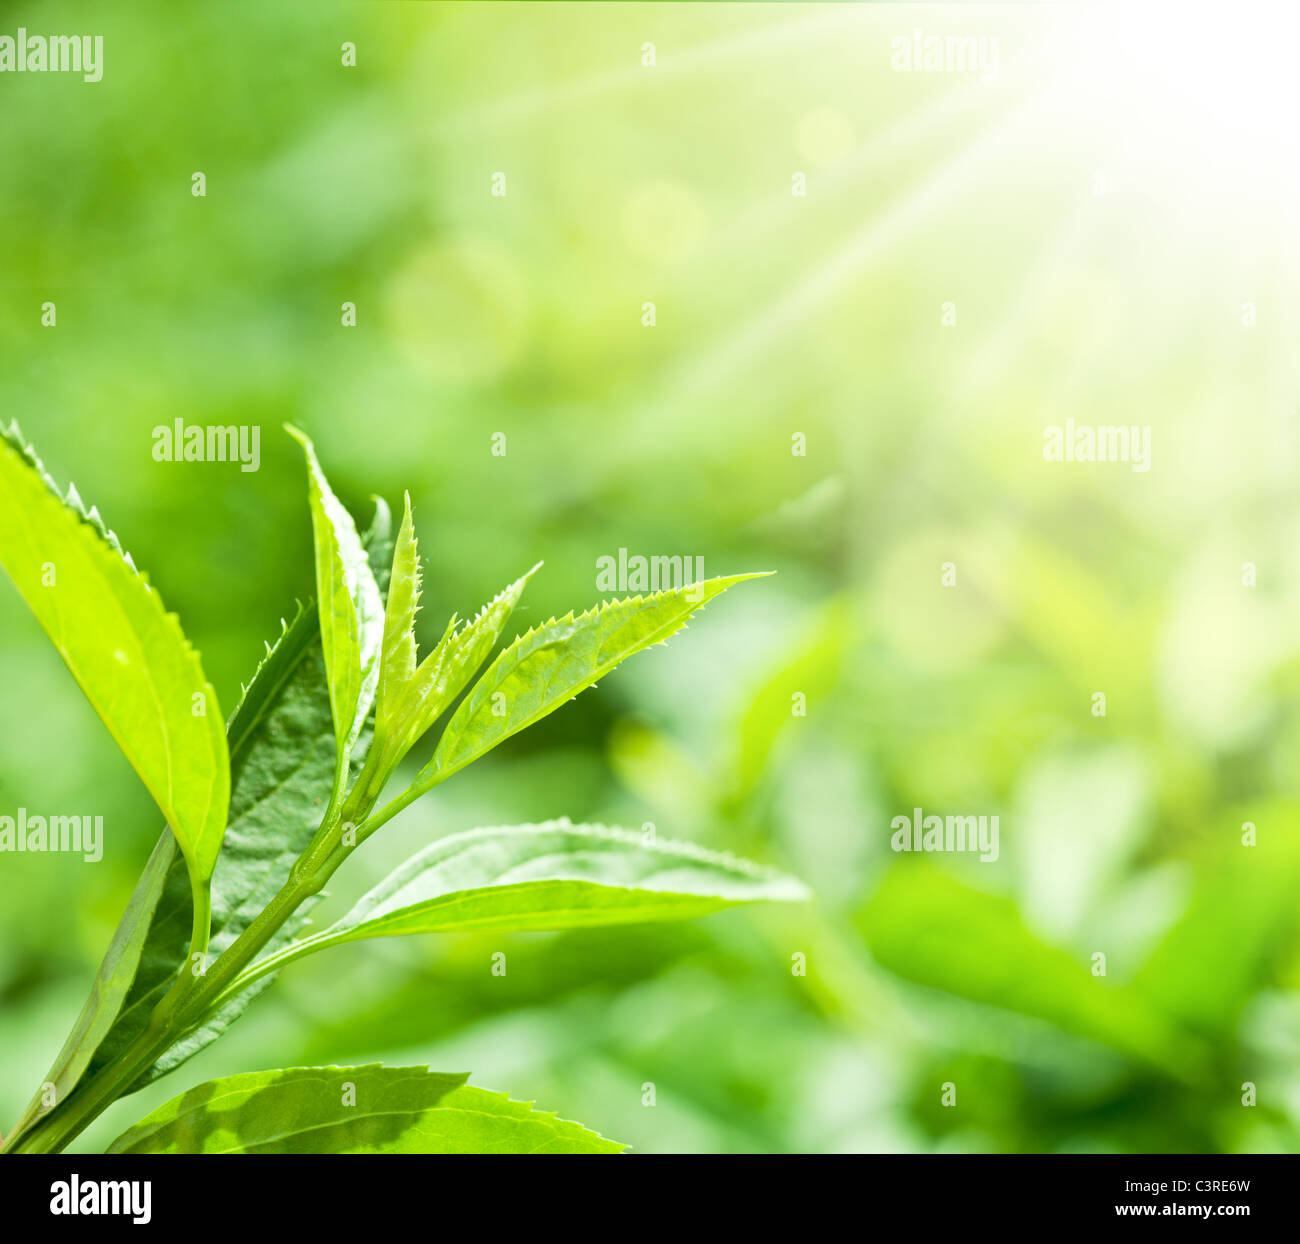 Tea leaves at a plantation in the beams of sunlight. Stock Photo